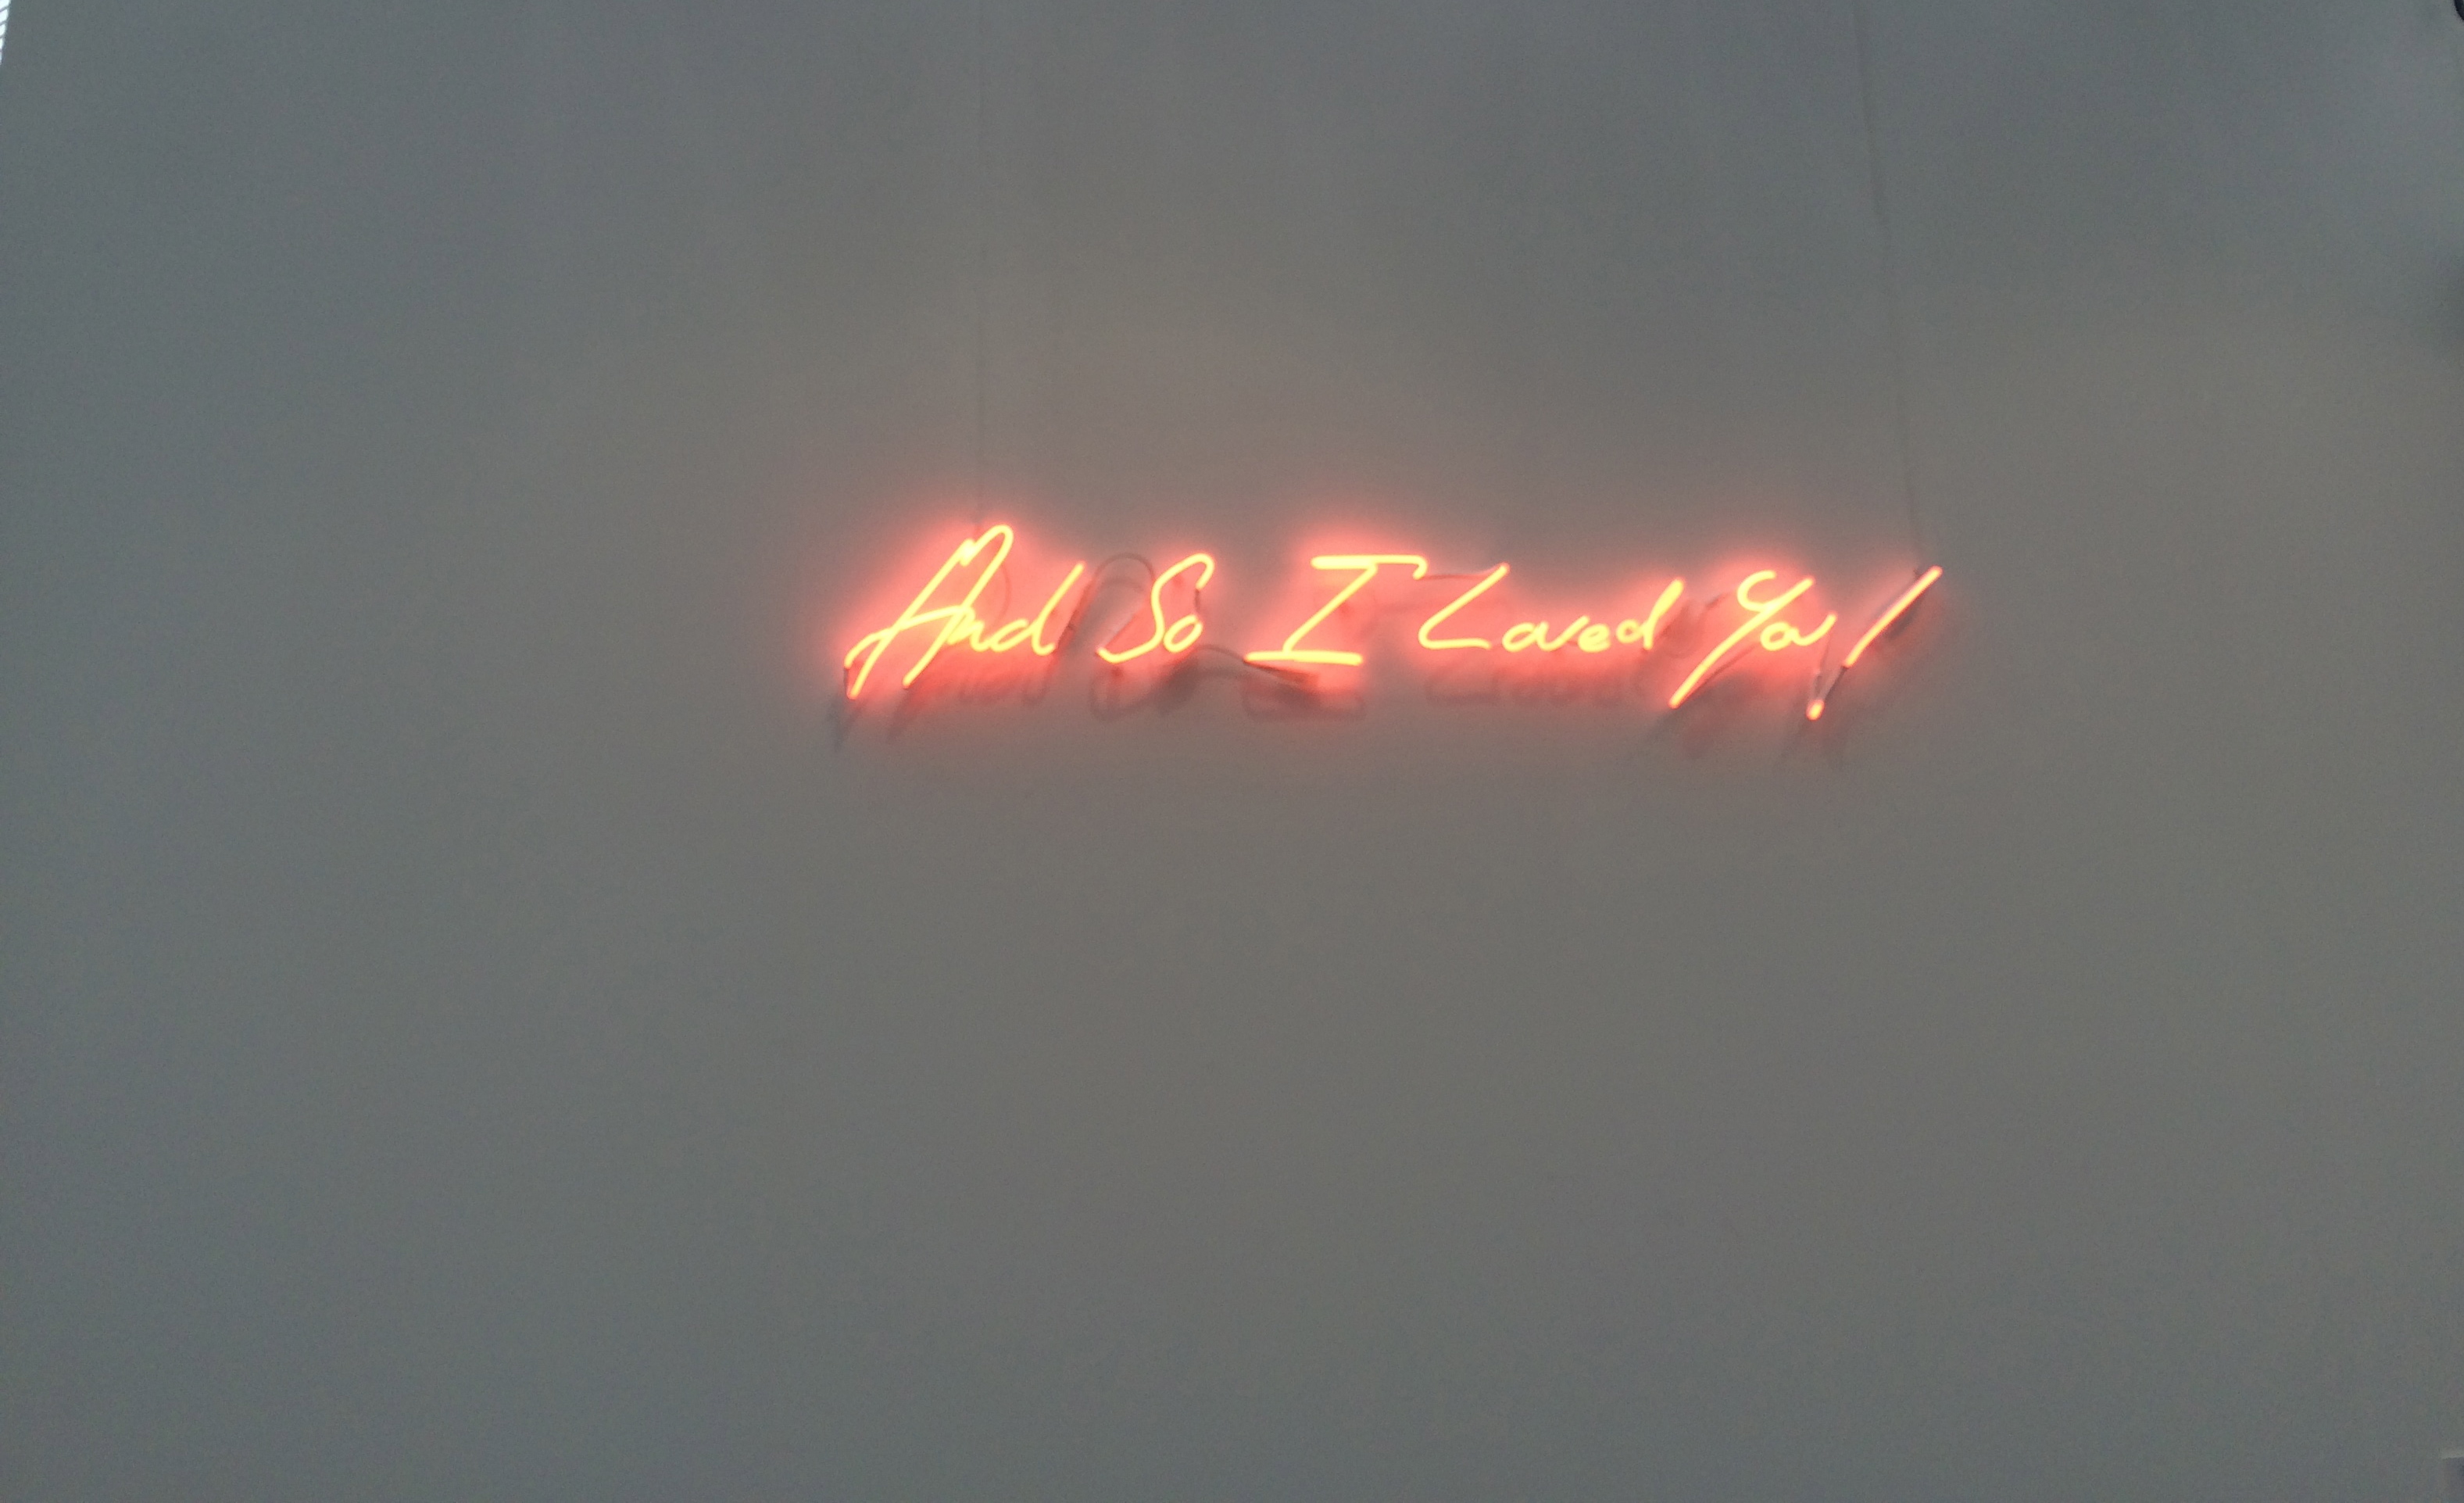 Tracey Emin, "And So I Loved You!", 2015